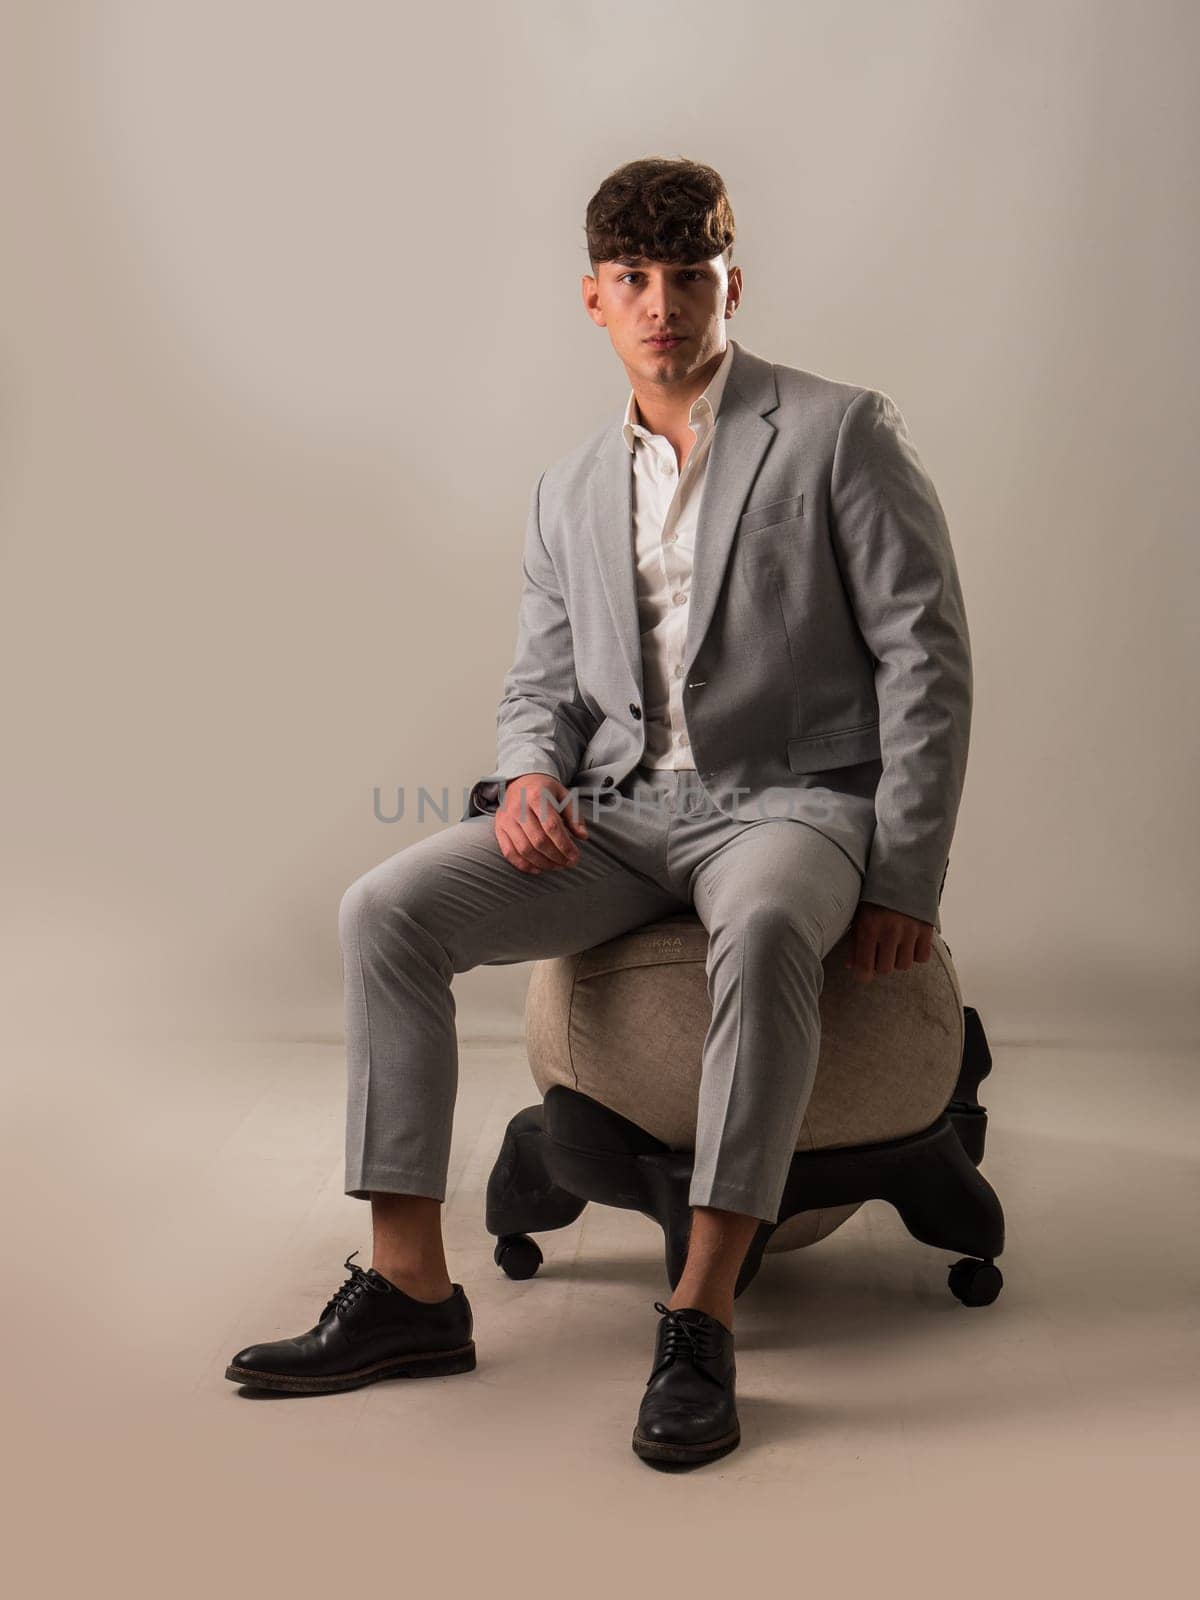 Full figure shot of young handsome man sitting on balance ball chair against white background, elegant young man with business suit